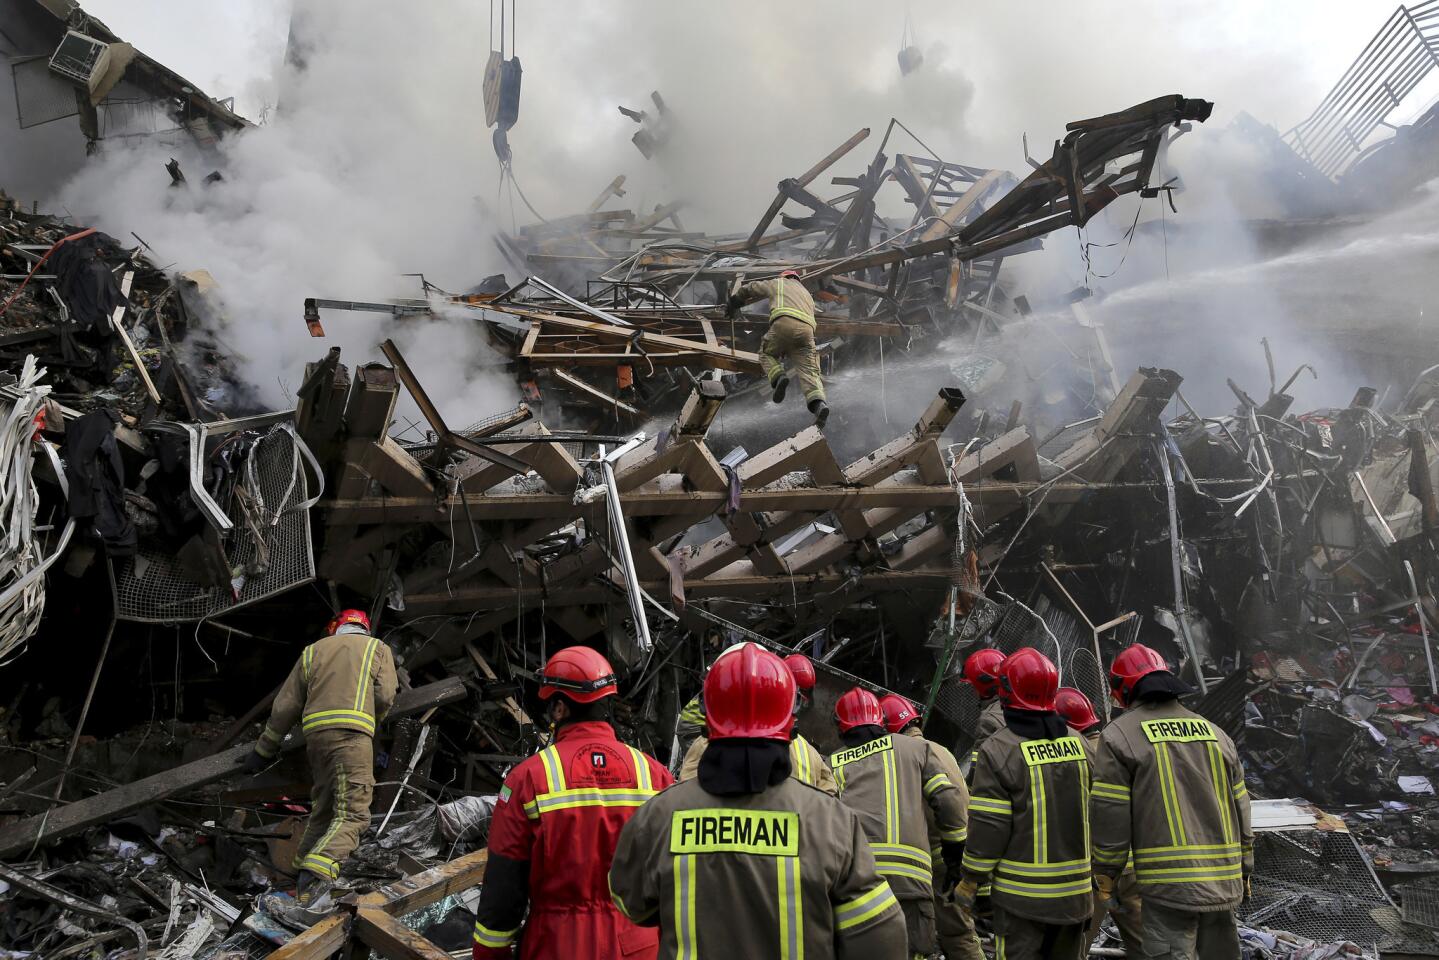 Iranian firefighters remove debris of the Plasco building, which was engulfed by a fire and collapsed in central Tehran.